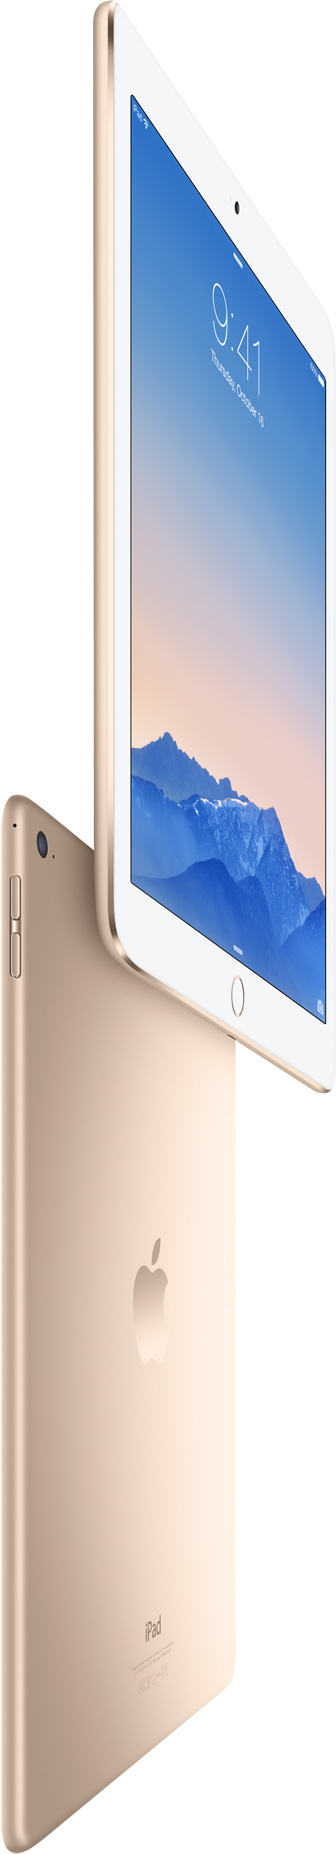 iPad Air 2 gold standing